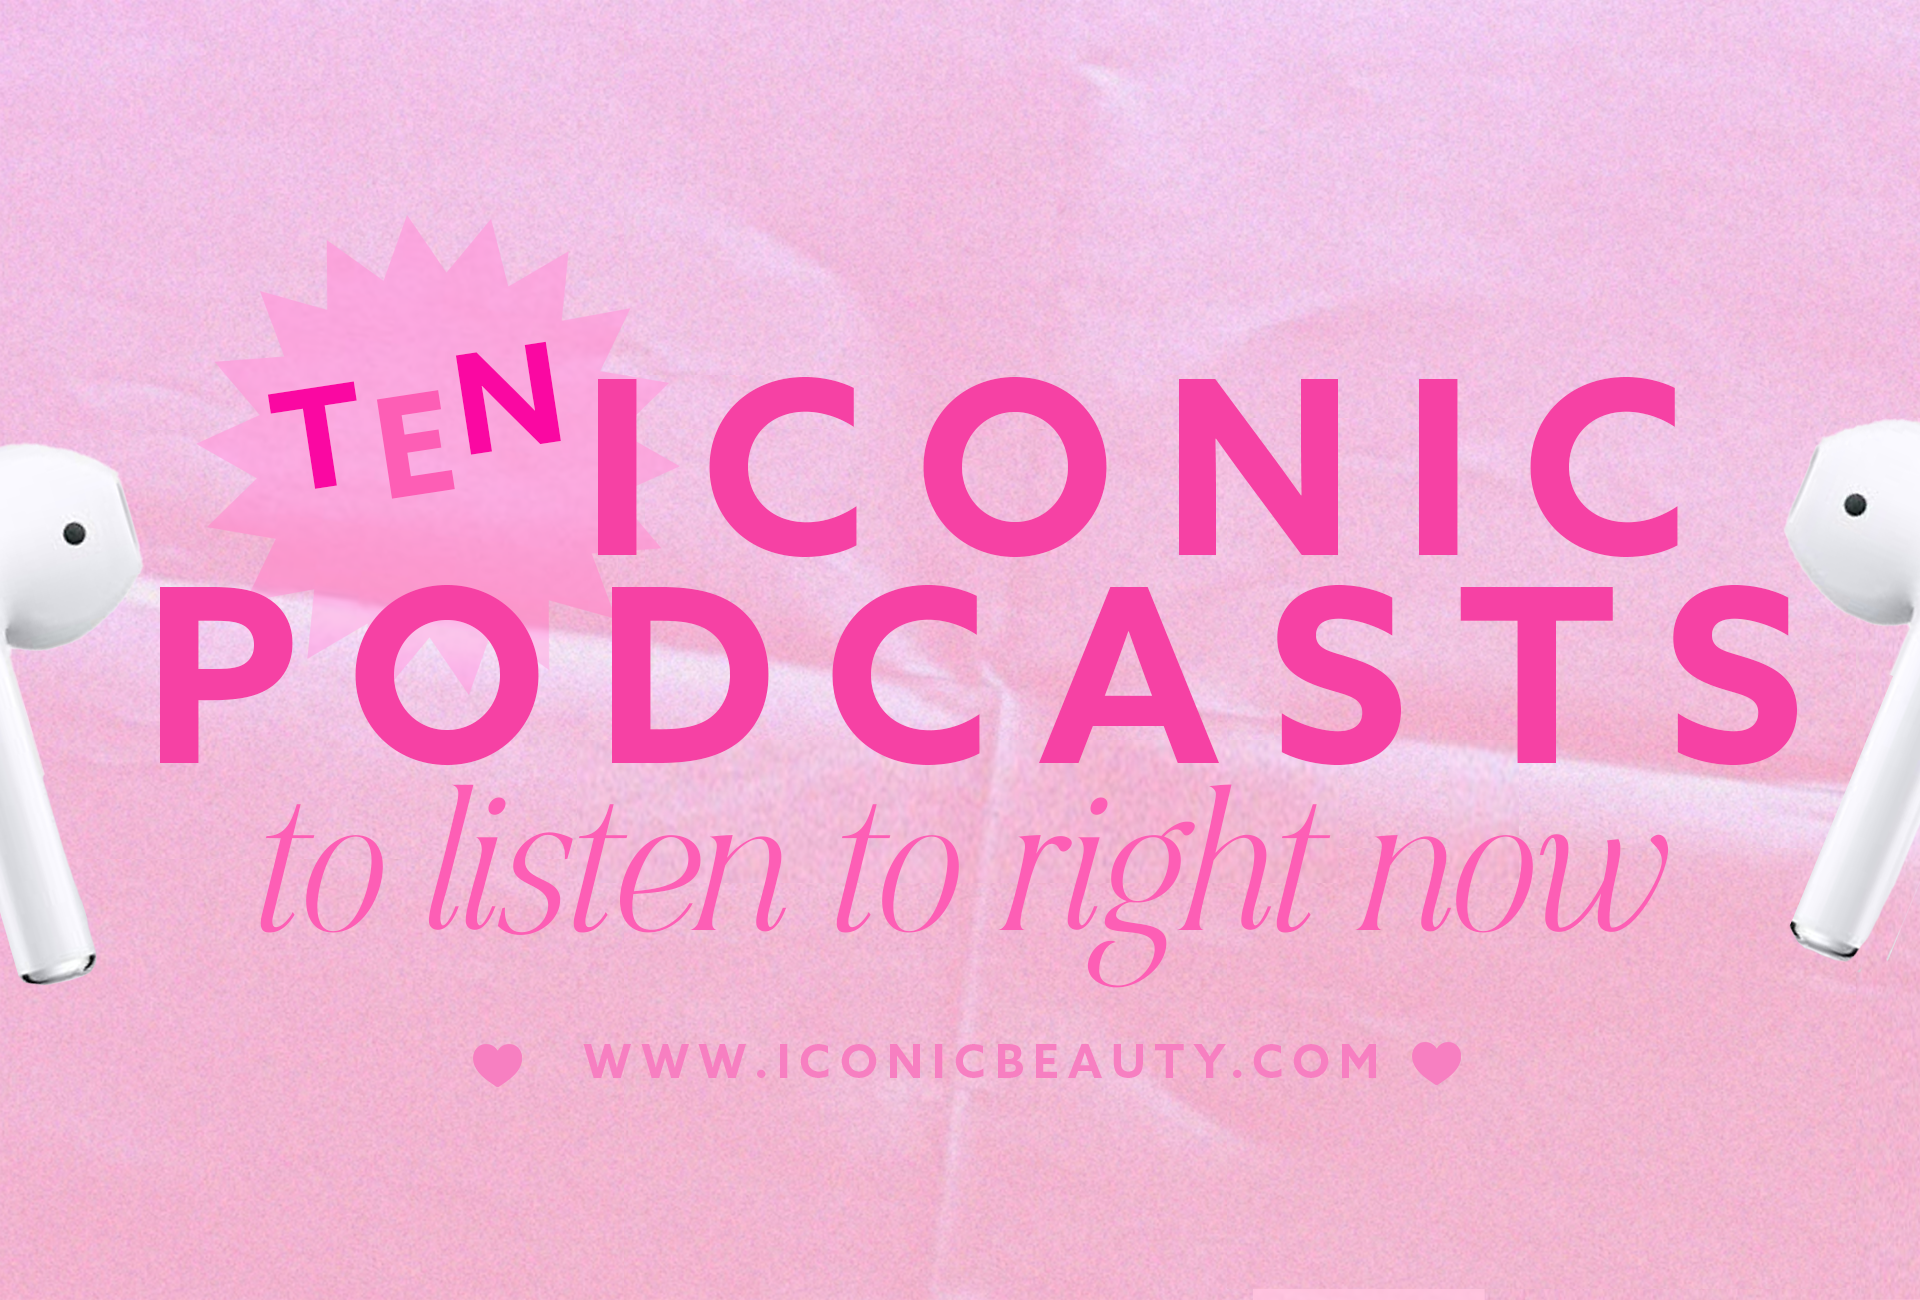 10 Iconic Podcasts to Listen to Right Now